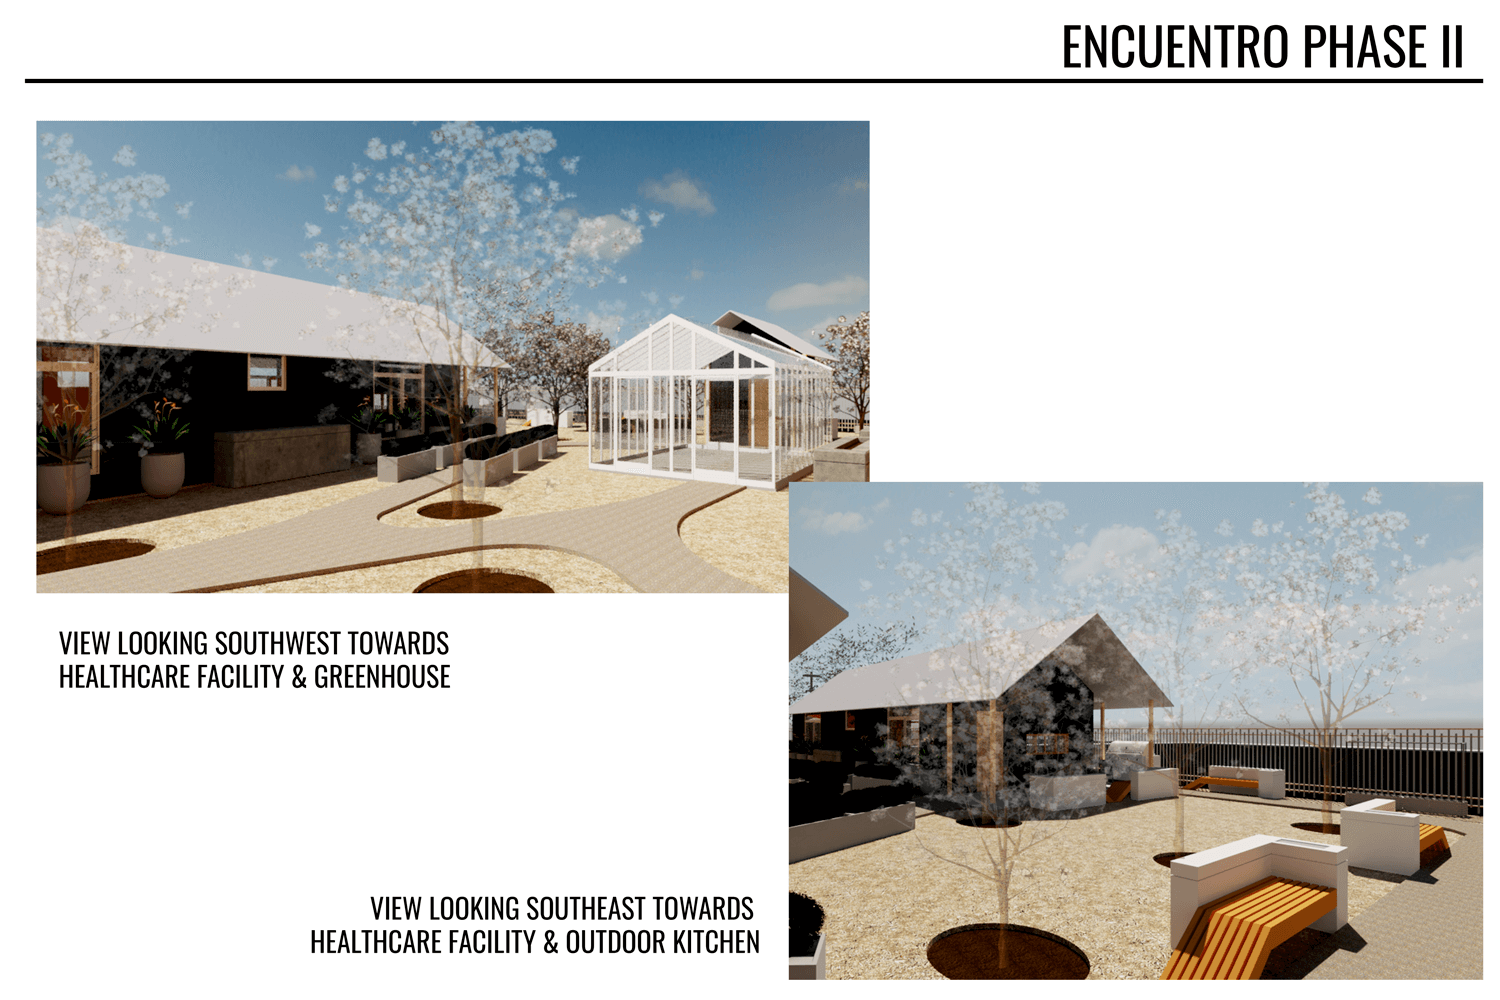 Preliminary architectural rendering of the Encuentro Phase II South Lot building complex